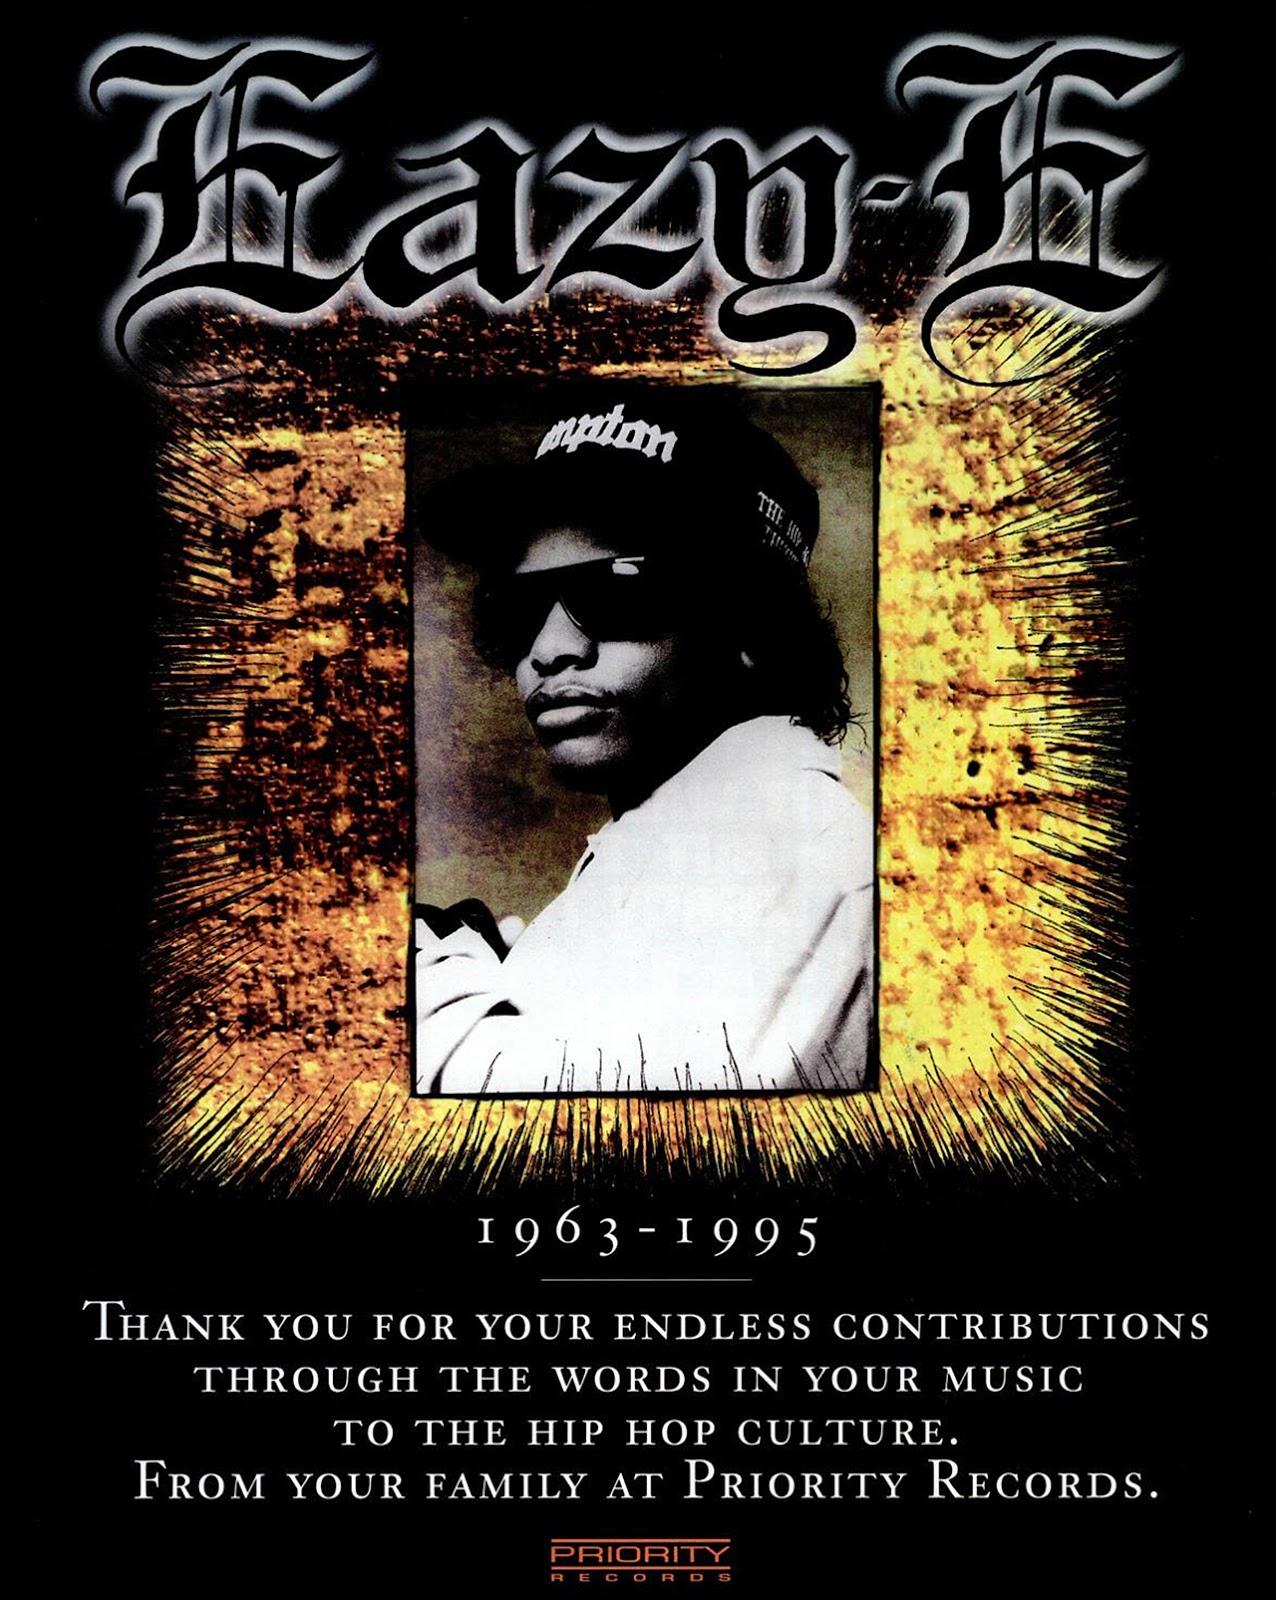 SOUL TV - Eazy-E would have been 56 today (born Sept. 7